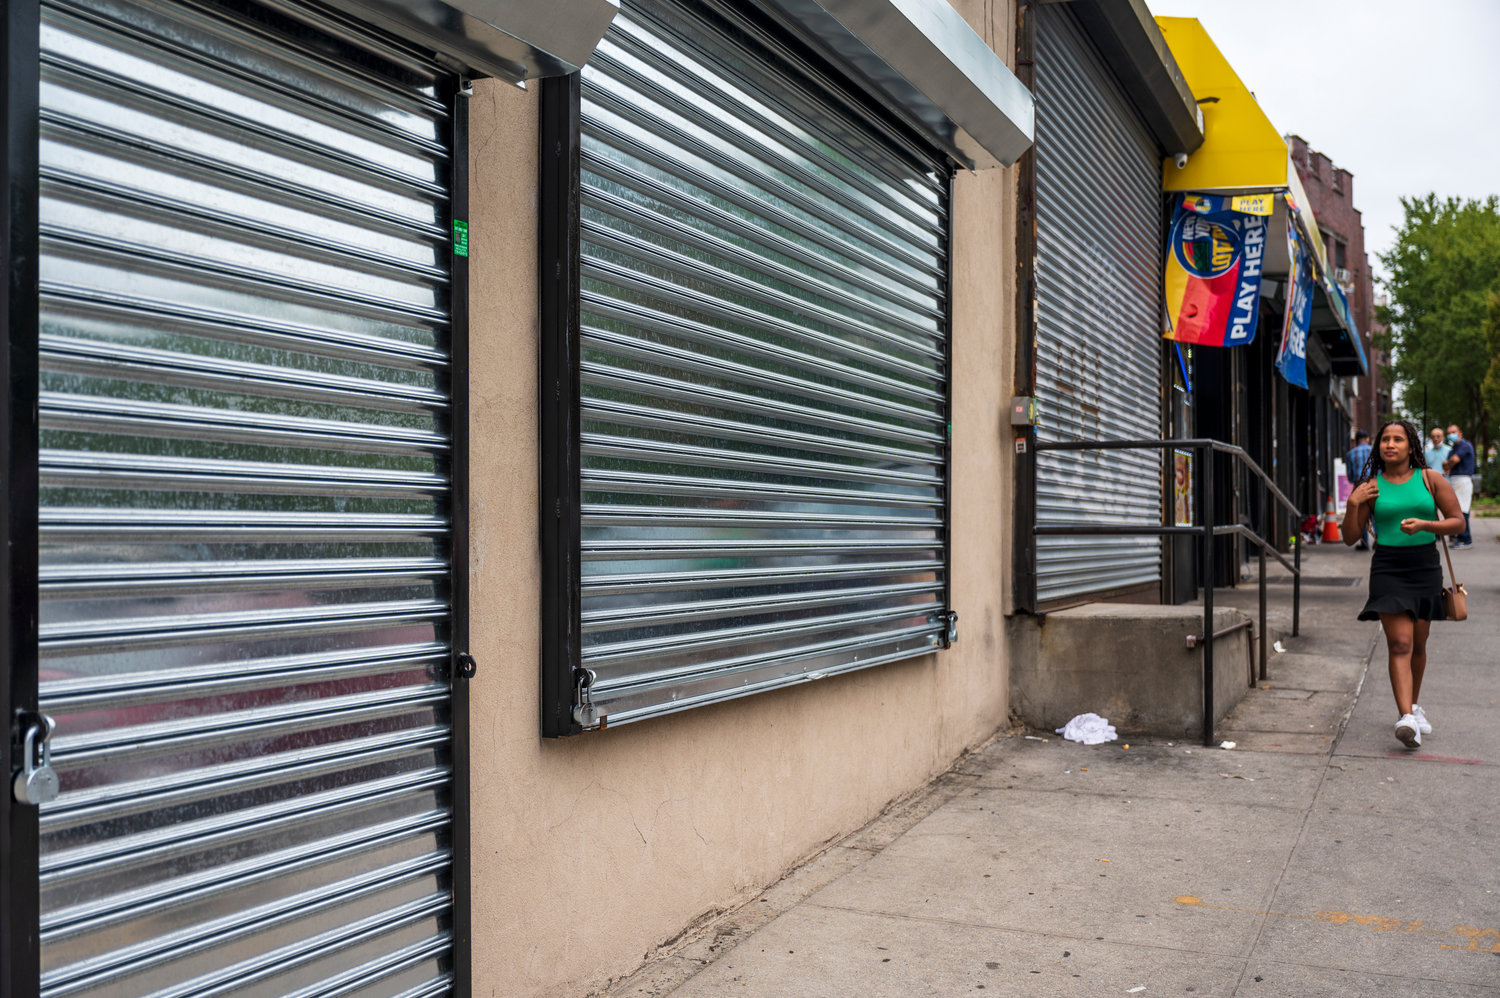 What once used to be a storefront across from Van Cortlandt Park is now expected to become a shelter for more than 100 single men beginning in 2023 at 6661 Broadway. Community Board 8 will address the proposal for the first time Oct. 13 at its health, hospitals and social services committee.